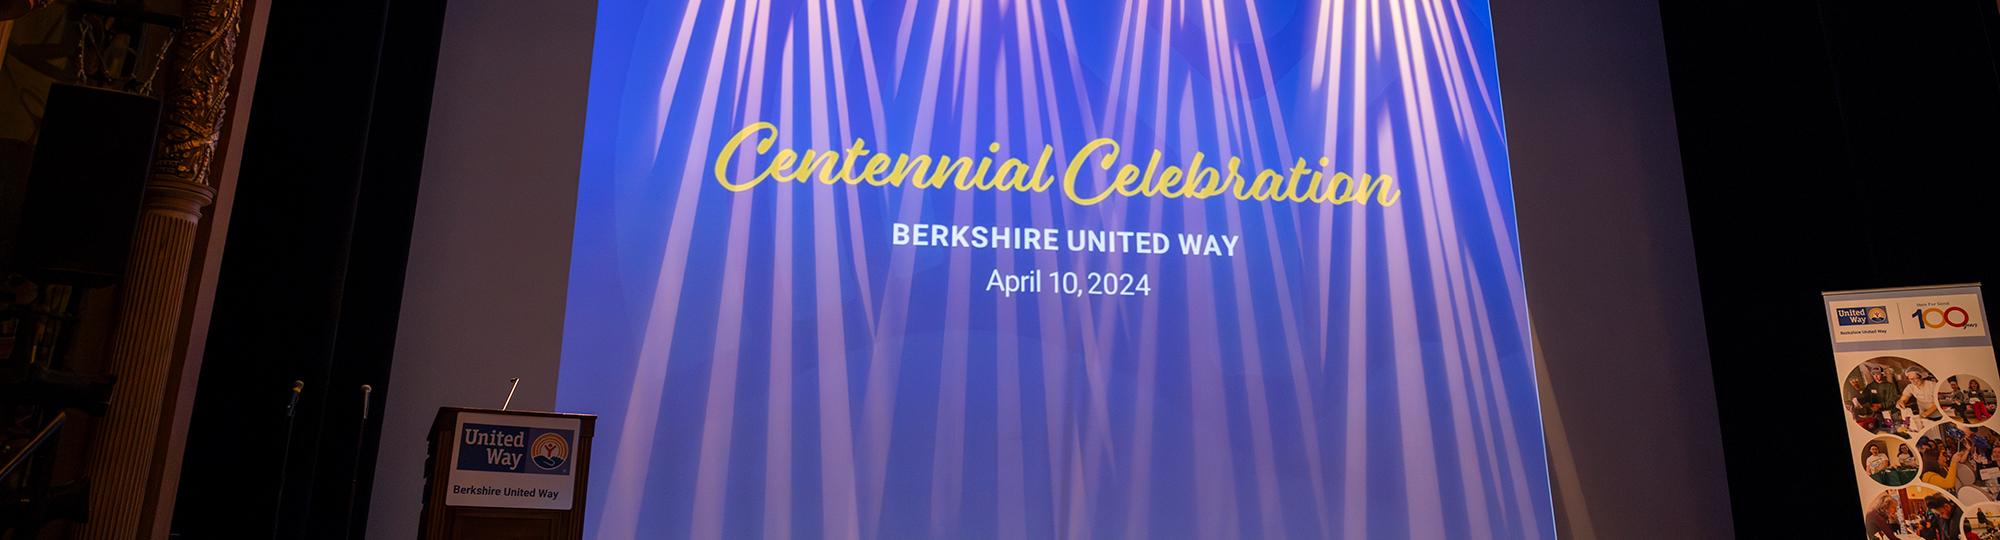 centennial celebration projected on a screen with blue background and lights